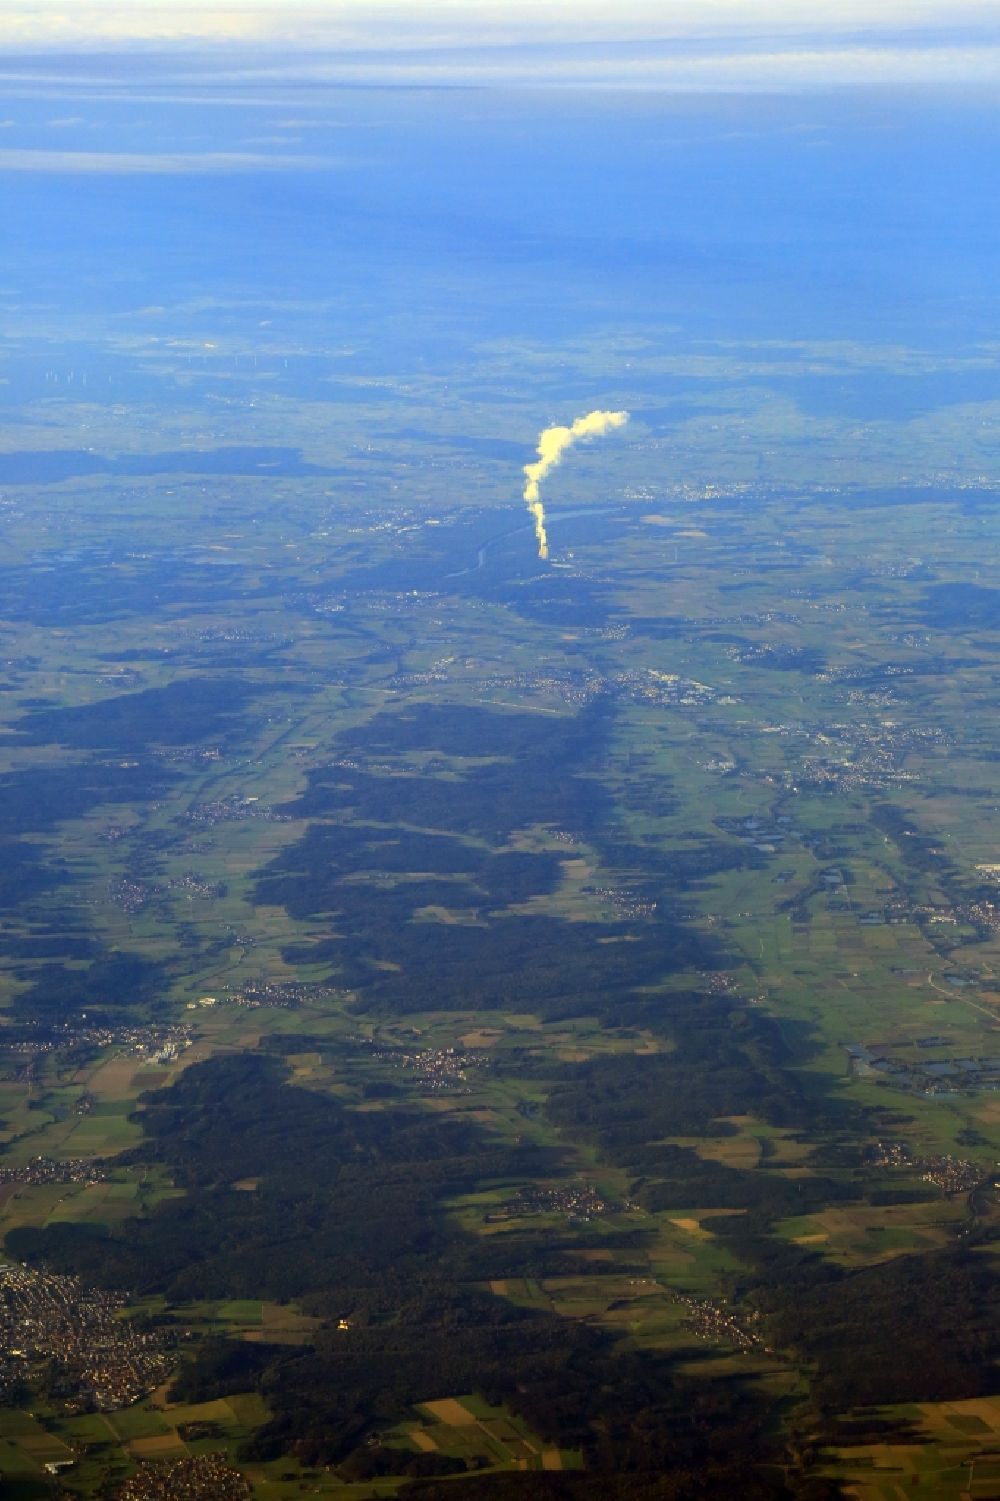 Aerial image Gundremmingen - Steam column of the cooling tower of the NPP nuclear power plant in Gundremmingen in the landscape of rural district Guenzburg in the state Bavaria, Germany